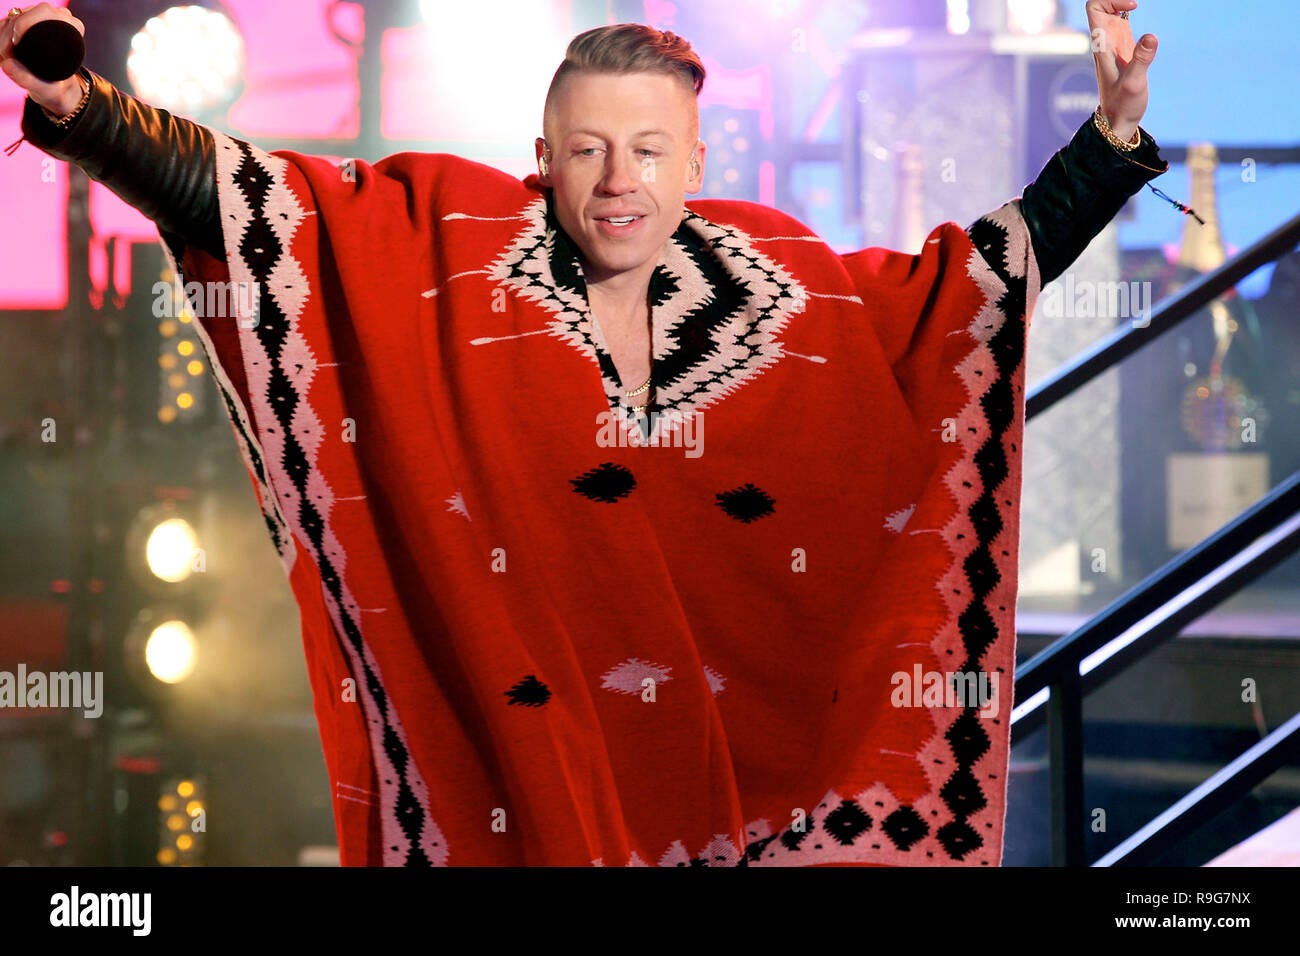 NEW YORK, NY - DECEMBER 31: Macklemore performs on stage at the New Year's  Eve 2014 ball drop celebration in Times Square on December 31, 2013 in New  York City. (Photo by